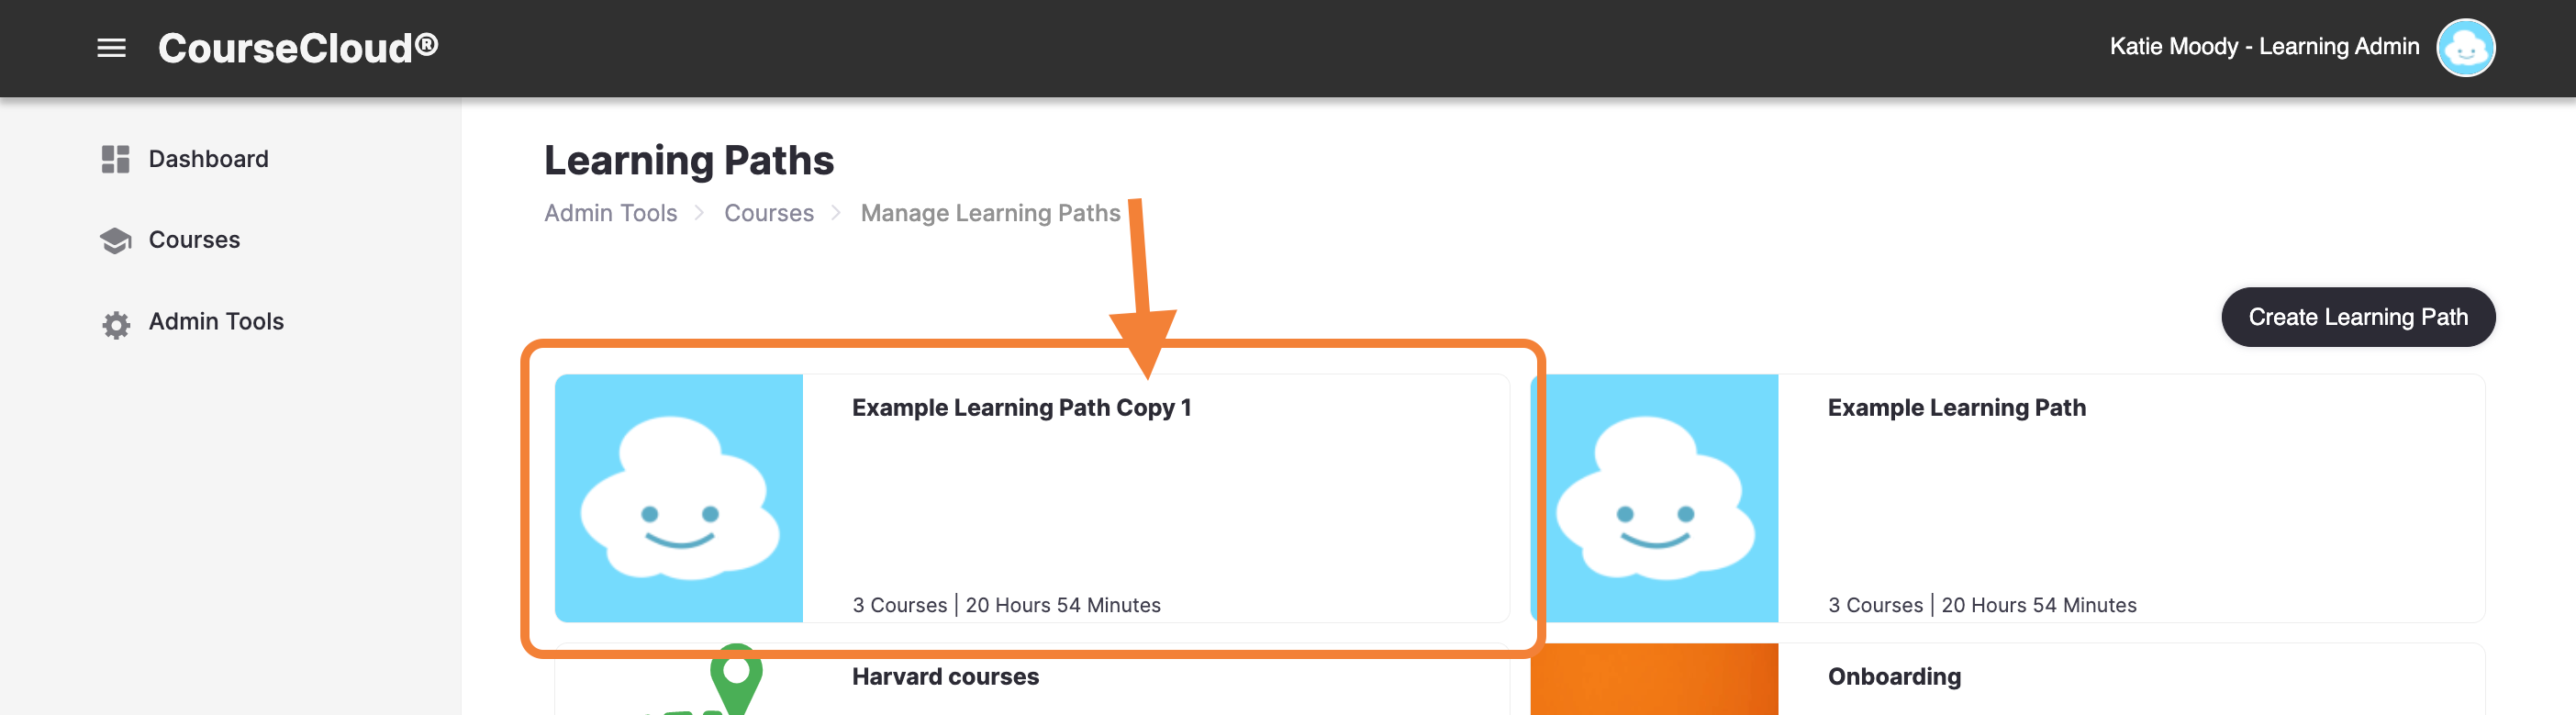 23_-_The_Learning_Paths_page__with_our_newly_duplicated_path.png